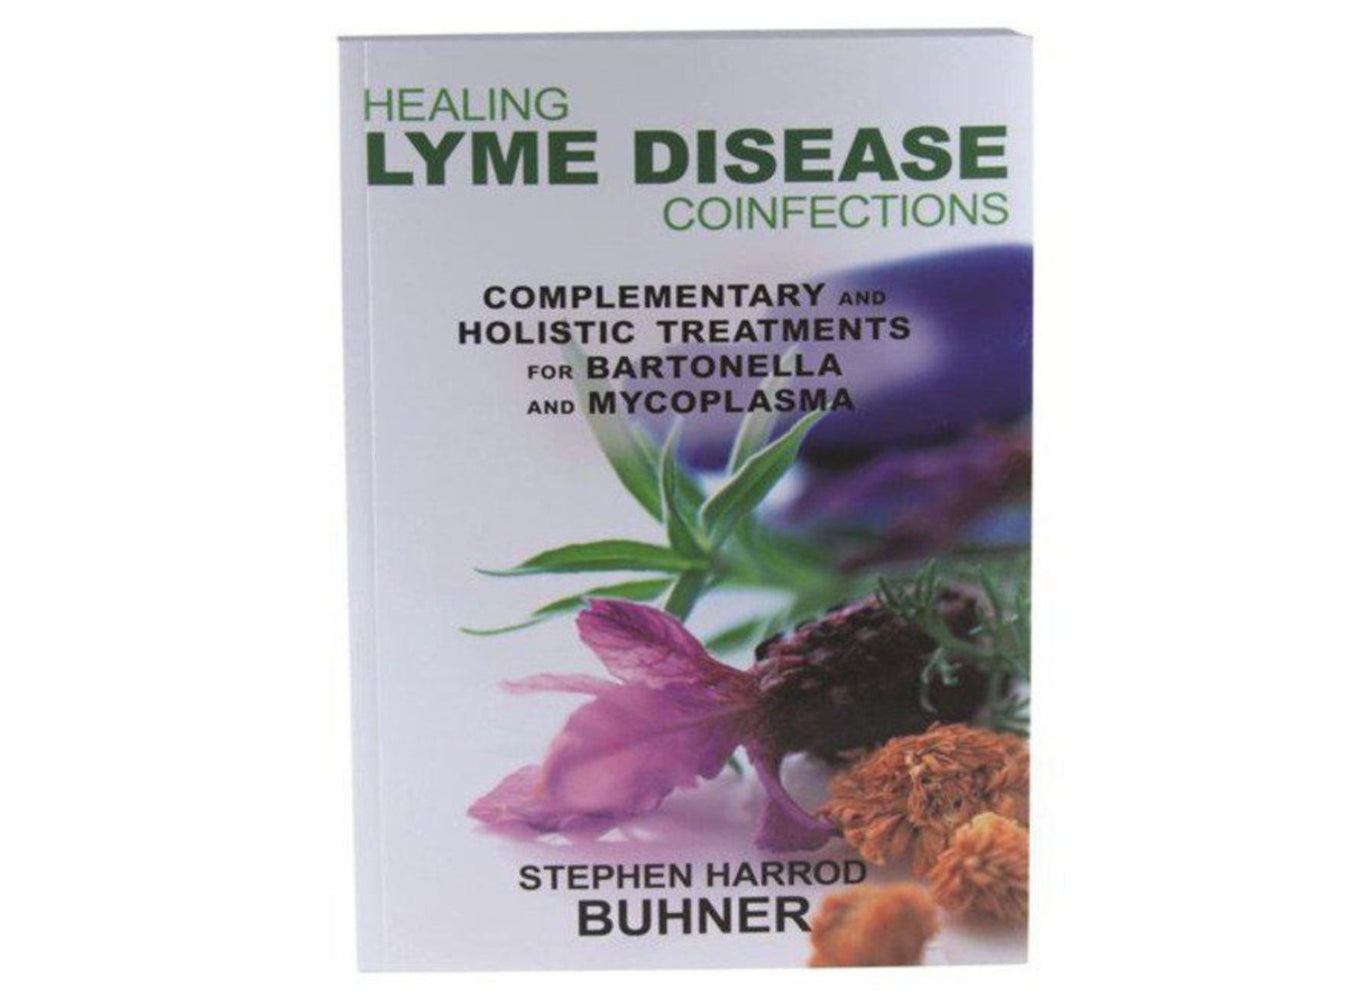 Healing Lyme Disease Coinfections by Stephen Harrod Buhner - Welcome Organics